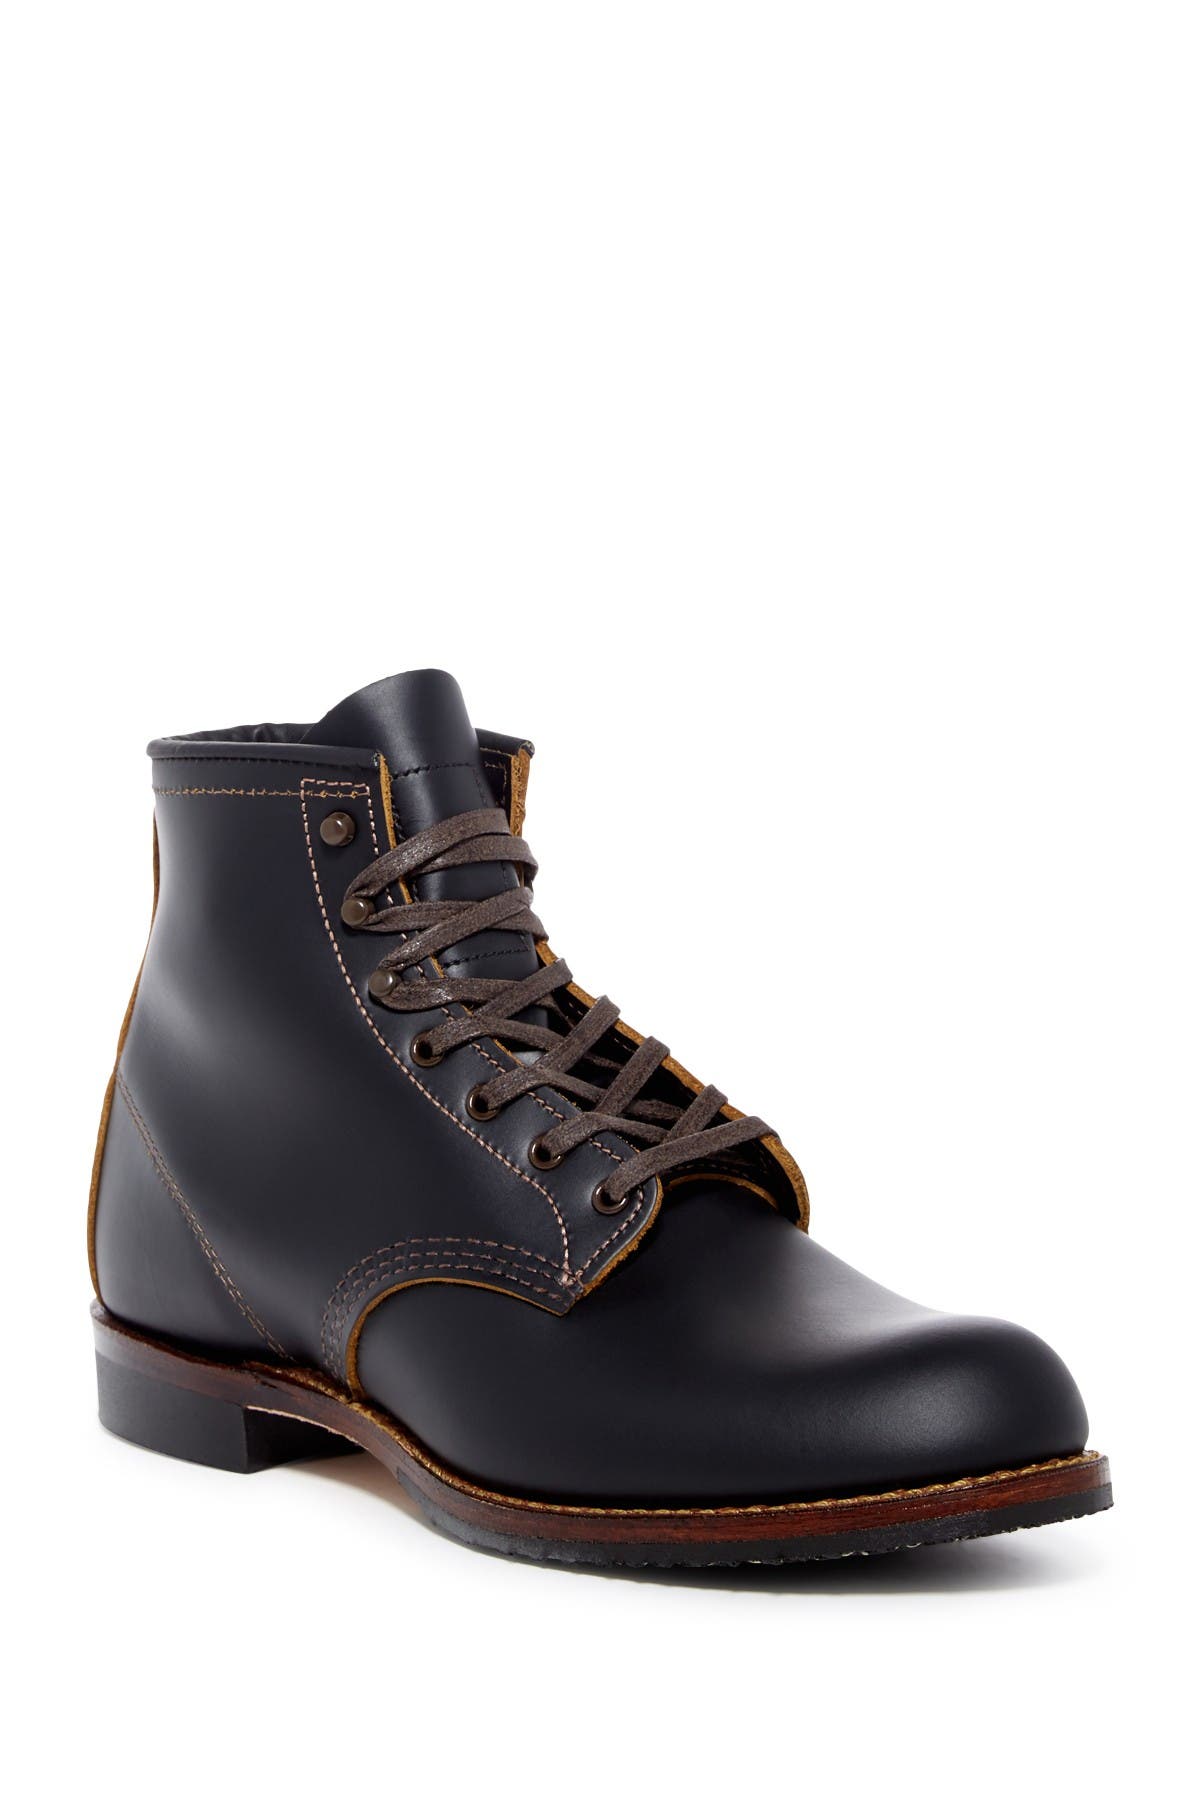 red wing beckman flatbox